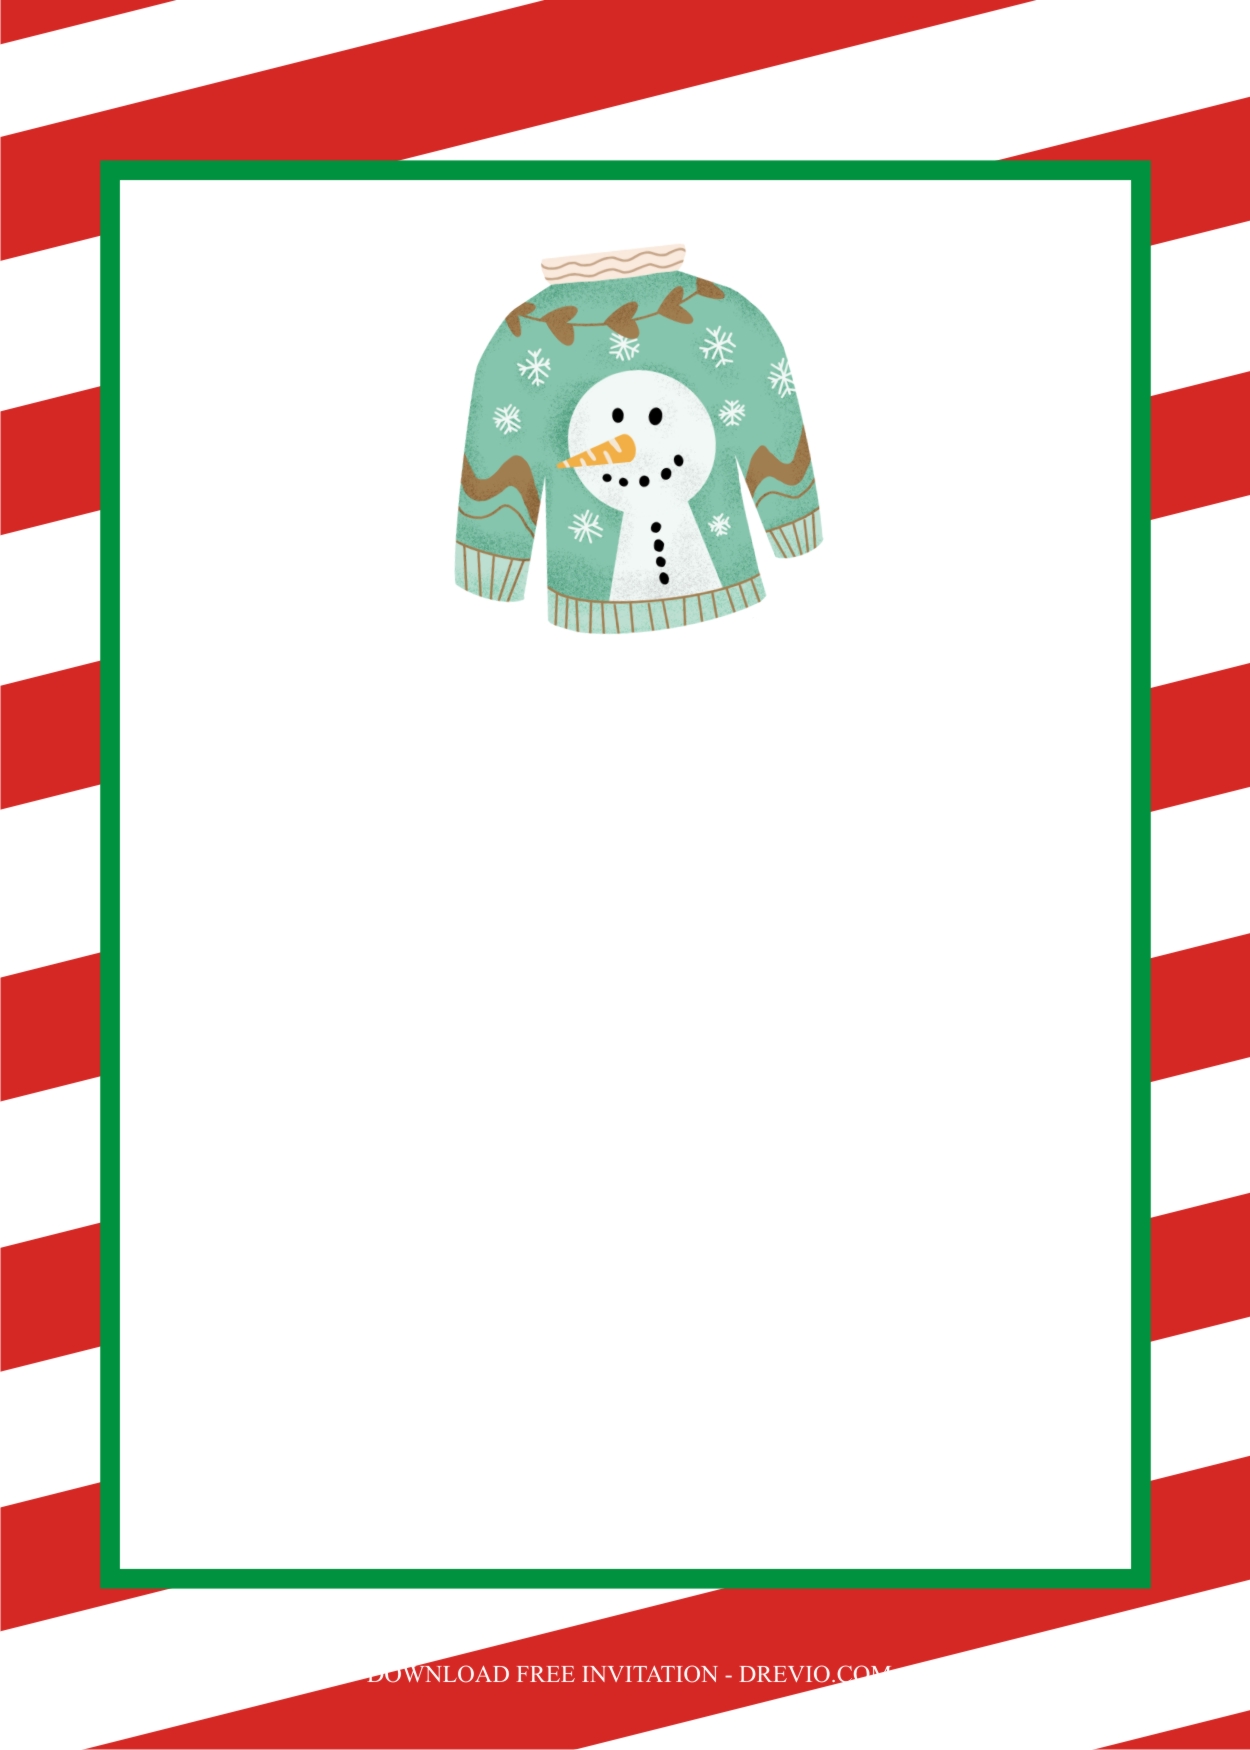 ugly-christmas-sweater-invitation-template1-download-hundreds-free